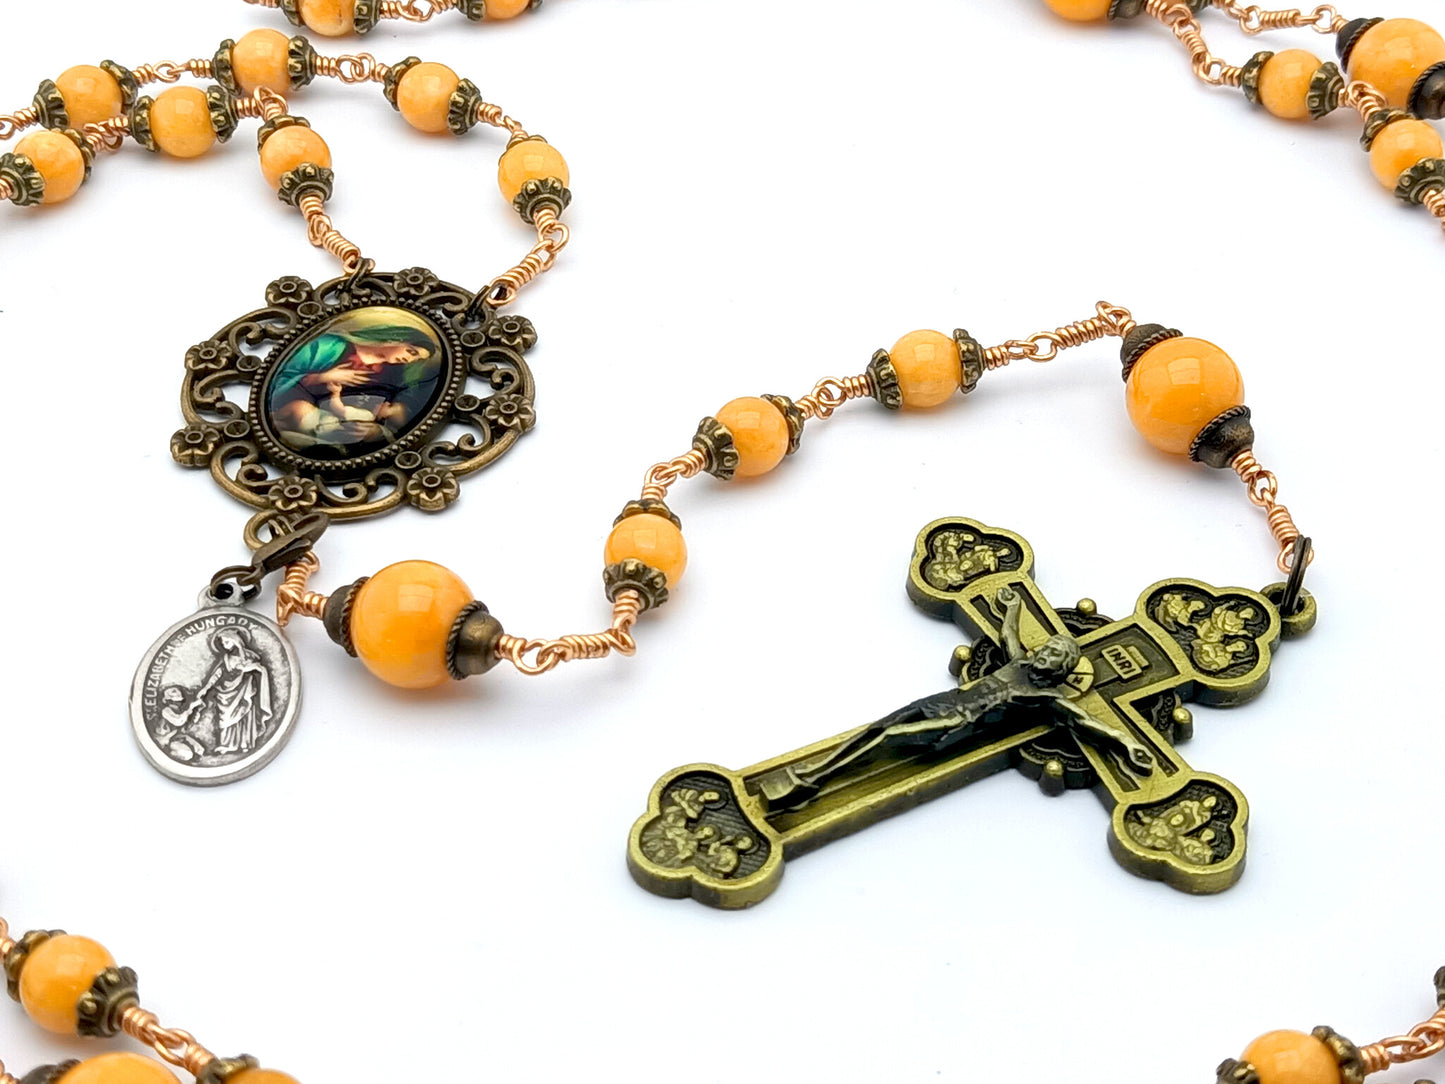 Virgin and Child vintage style unbreakable rosary in yellow agate gemstone.